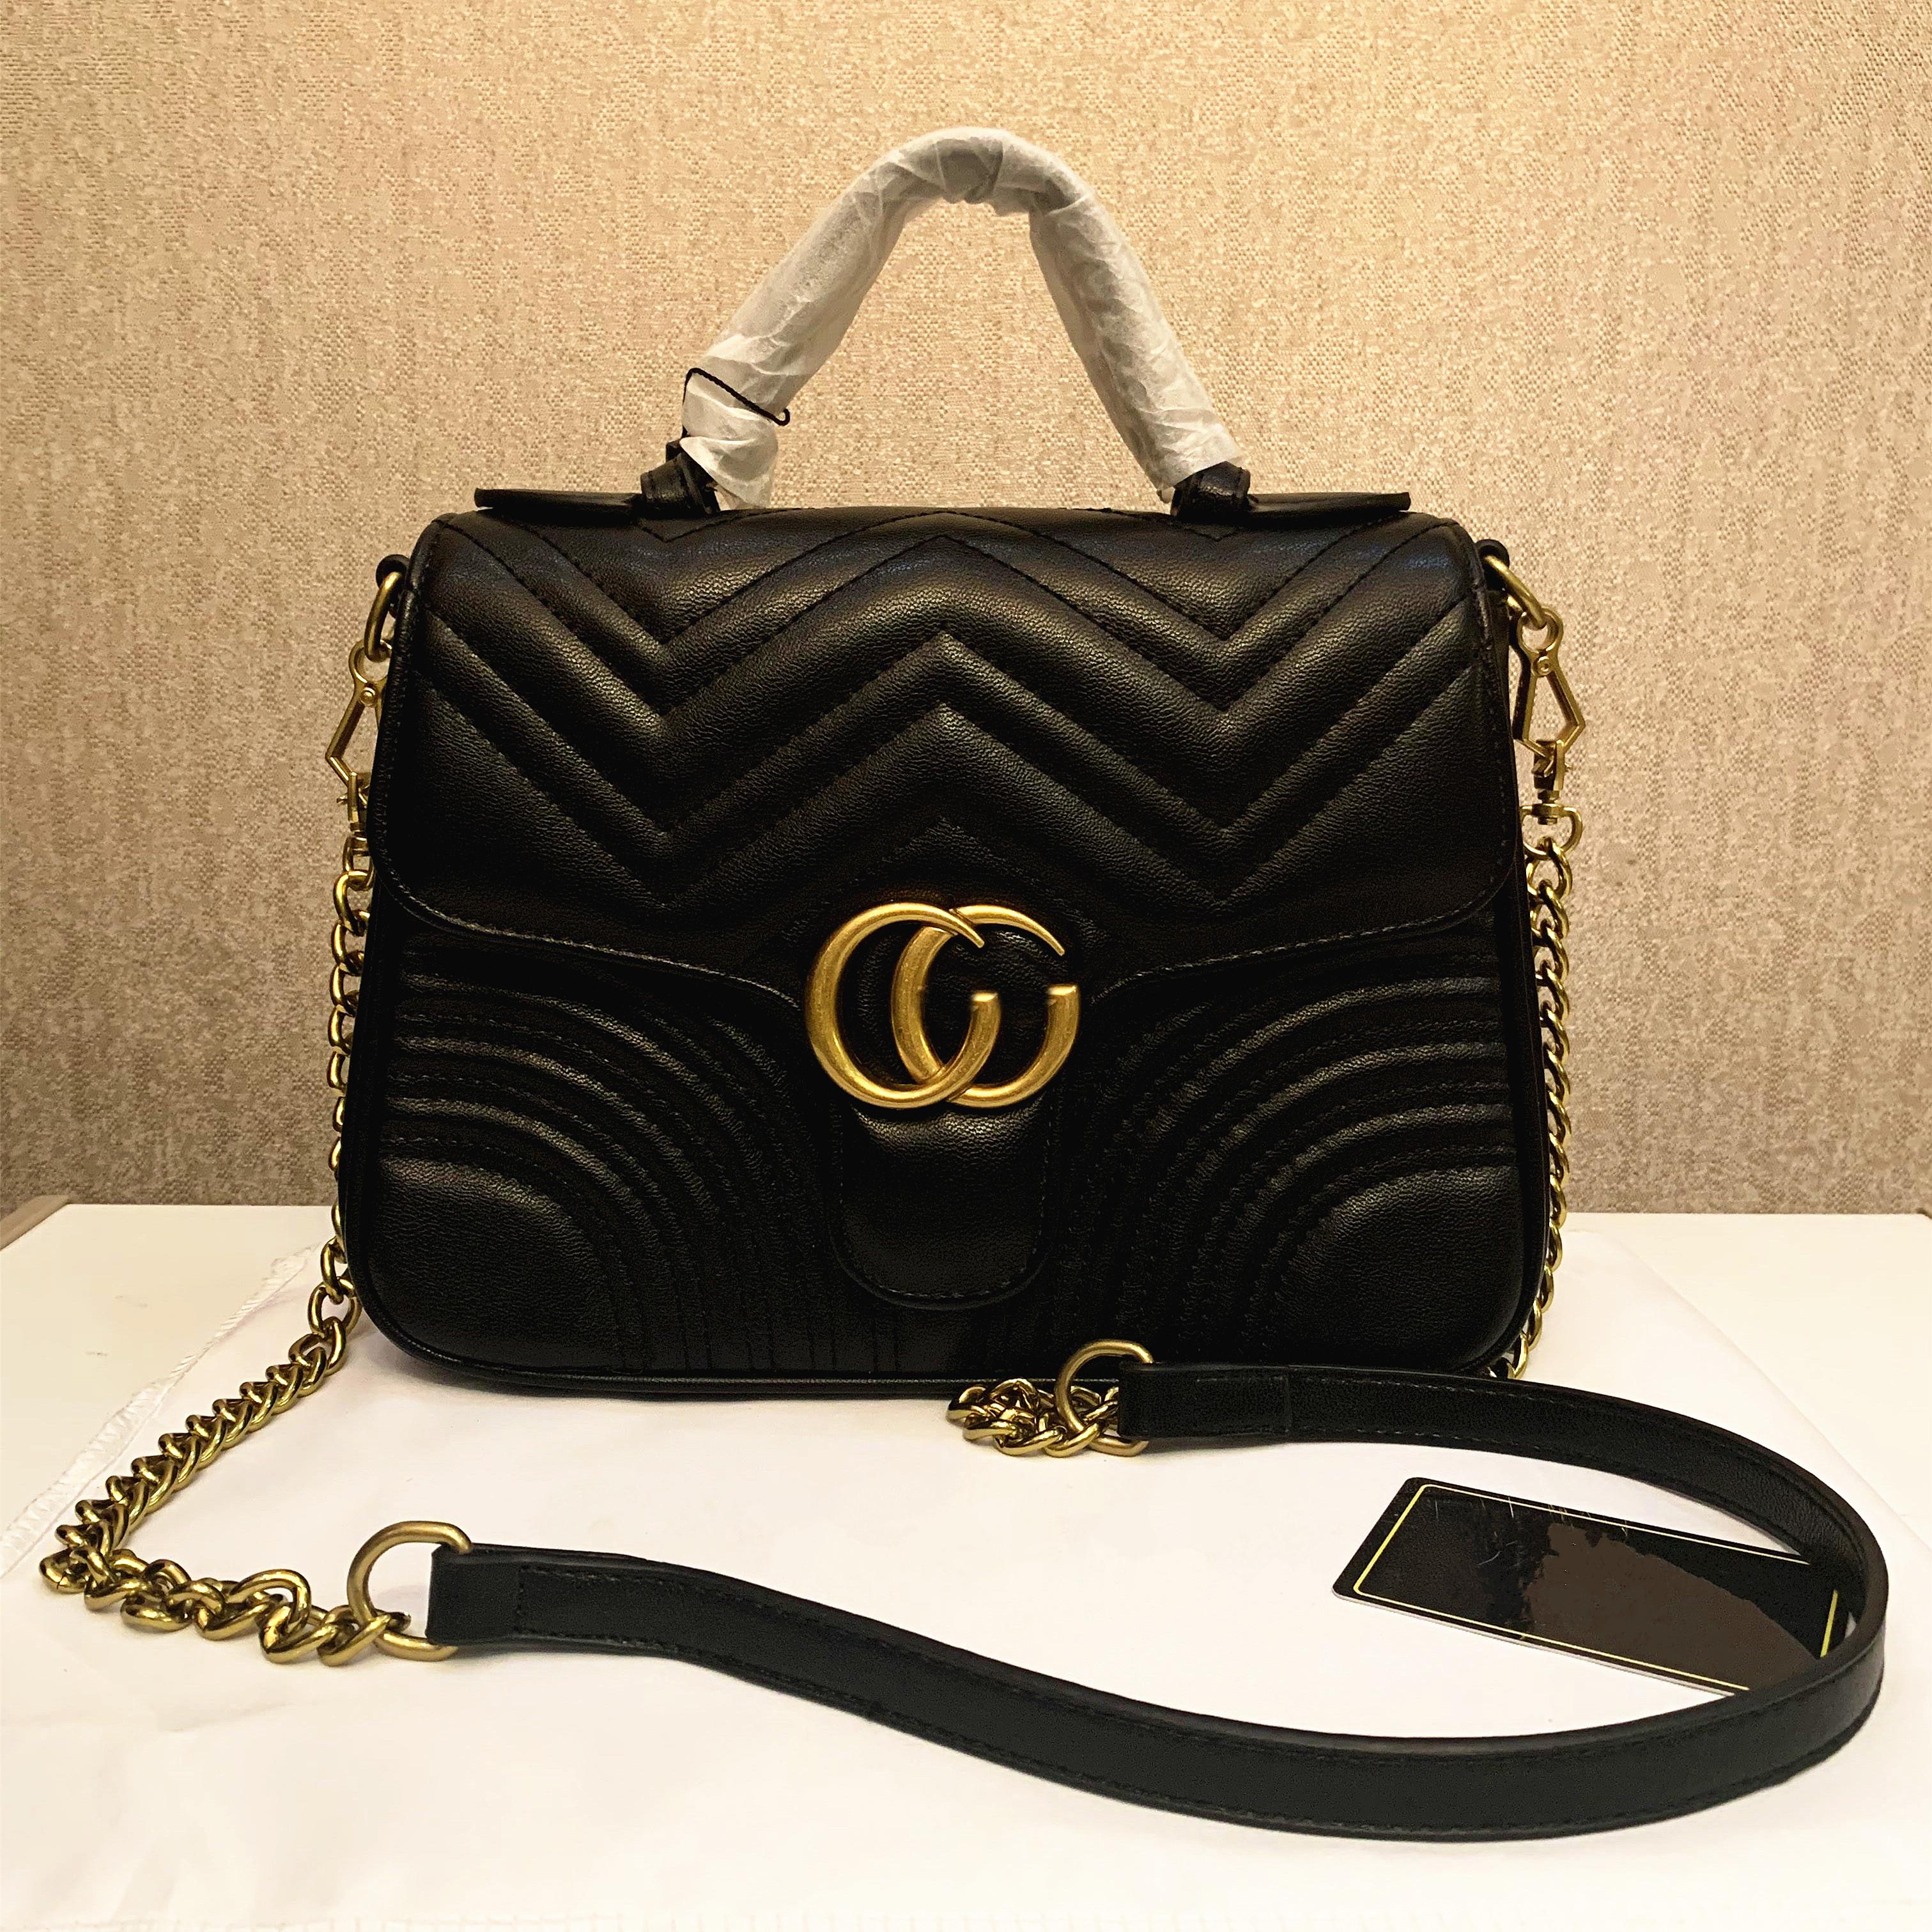 

Luxury Designer New Style Marmont Shoulder Bags Women Gold Chain Cross Body GG Bag PU Leather Handbags Purse Female Messenger Tote Bag, Invoices are not sold separately